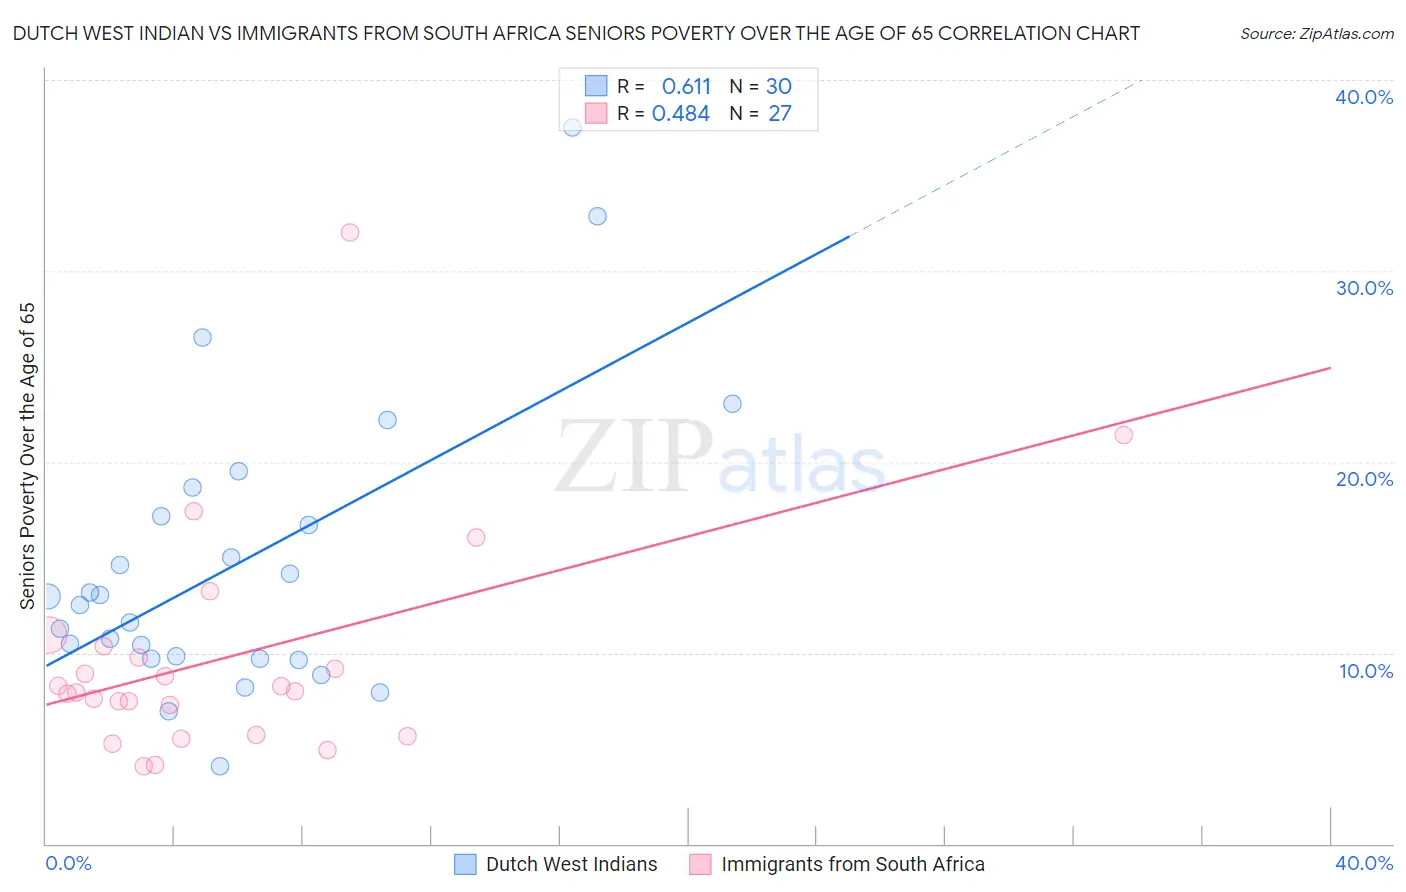 Dutch West Indian vs Immigrants from South Africa Seniors Poverty Over the Age of 65